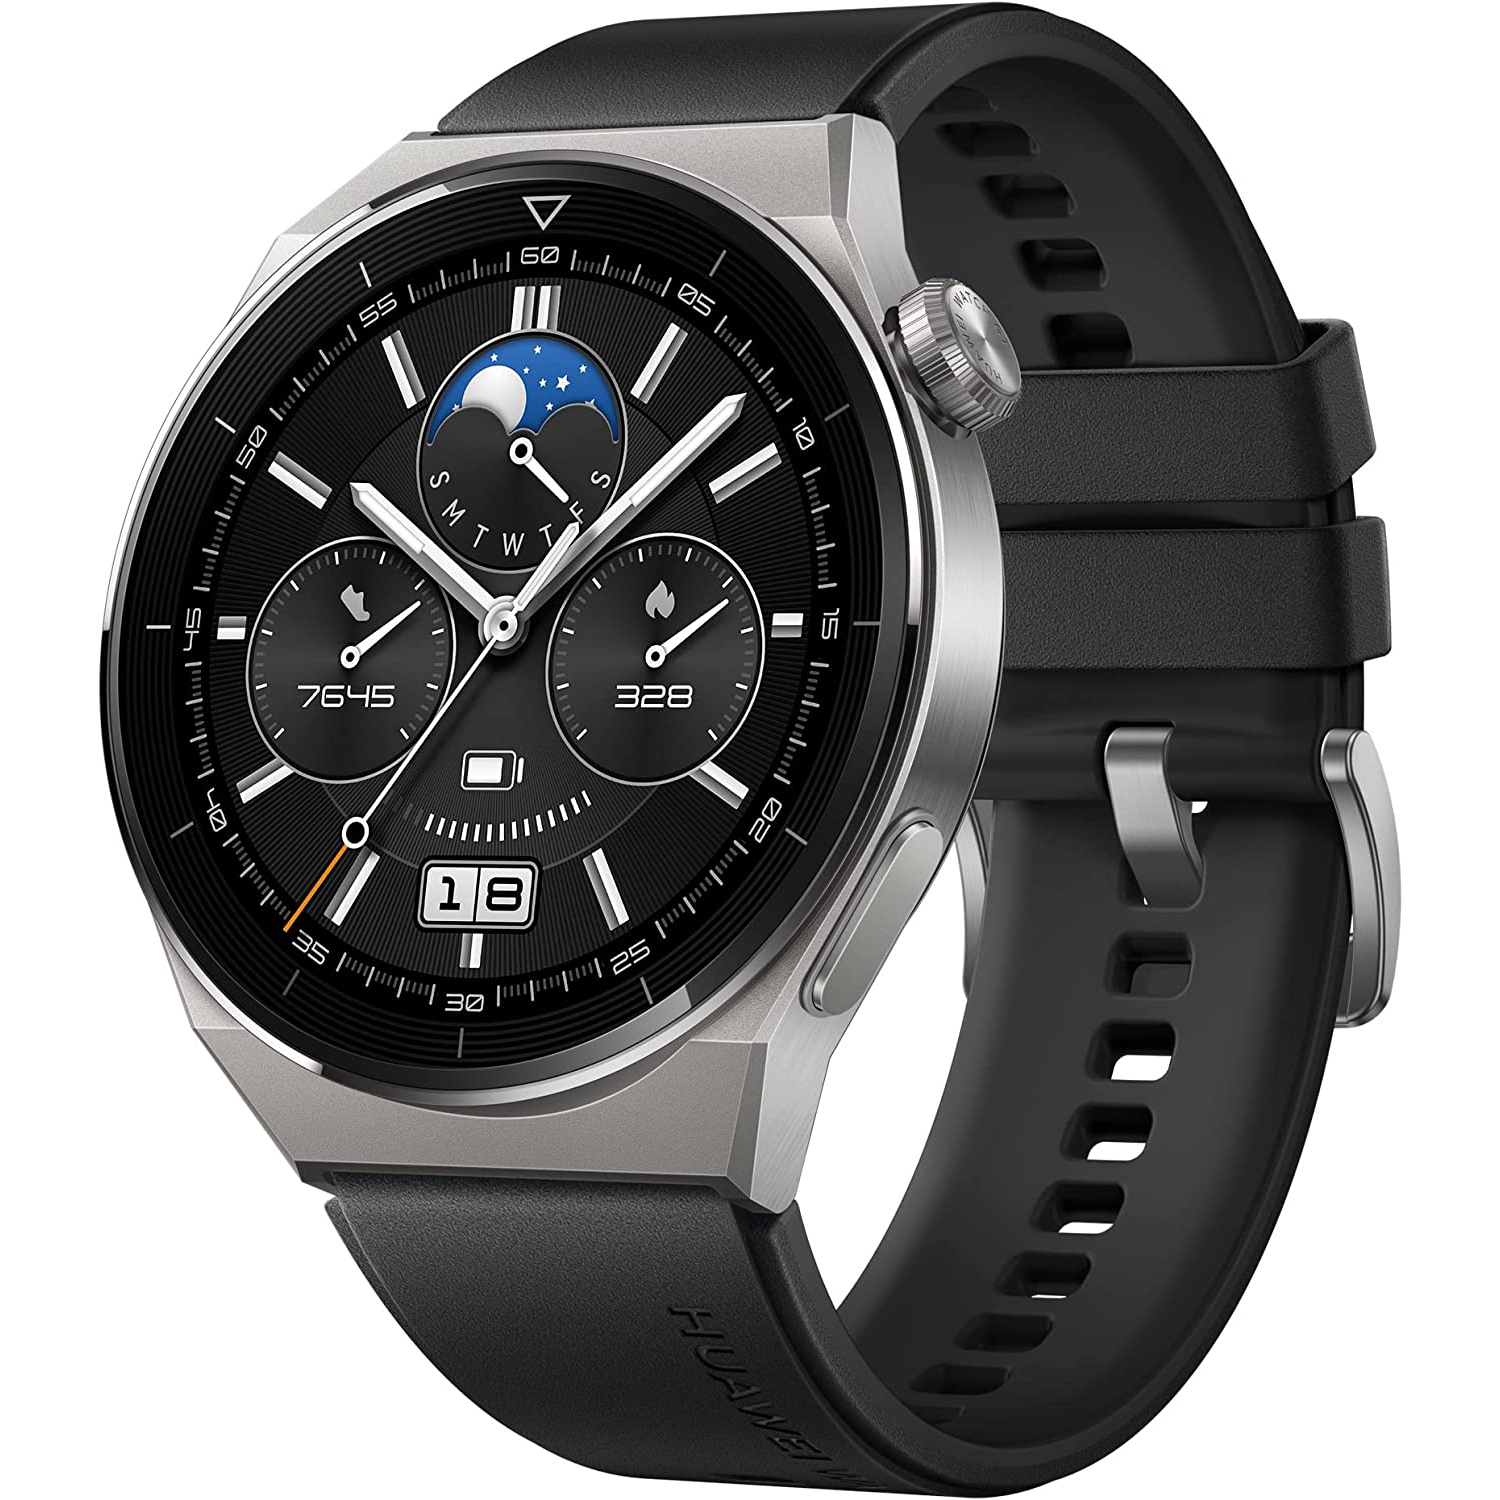 HUAWEI WATCH GT 3 Pro - All-Day Fitness Tracker and Health Monitoring - Durable Battery - Sapphire Watch Dial - Bluetooth Calling - 46mm, Black Fluoroelastomer Strap